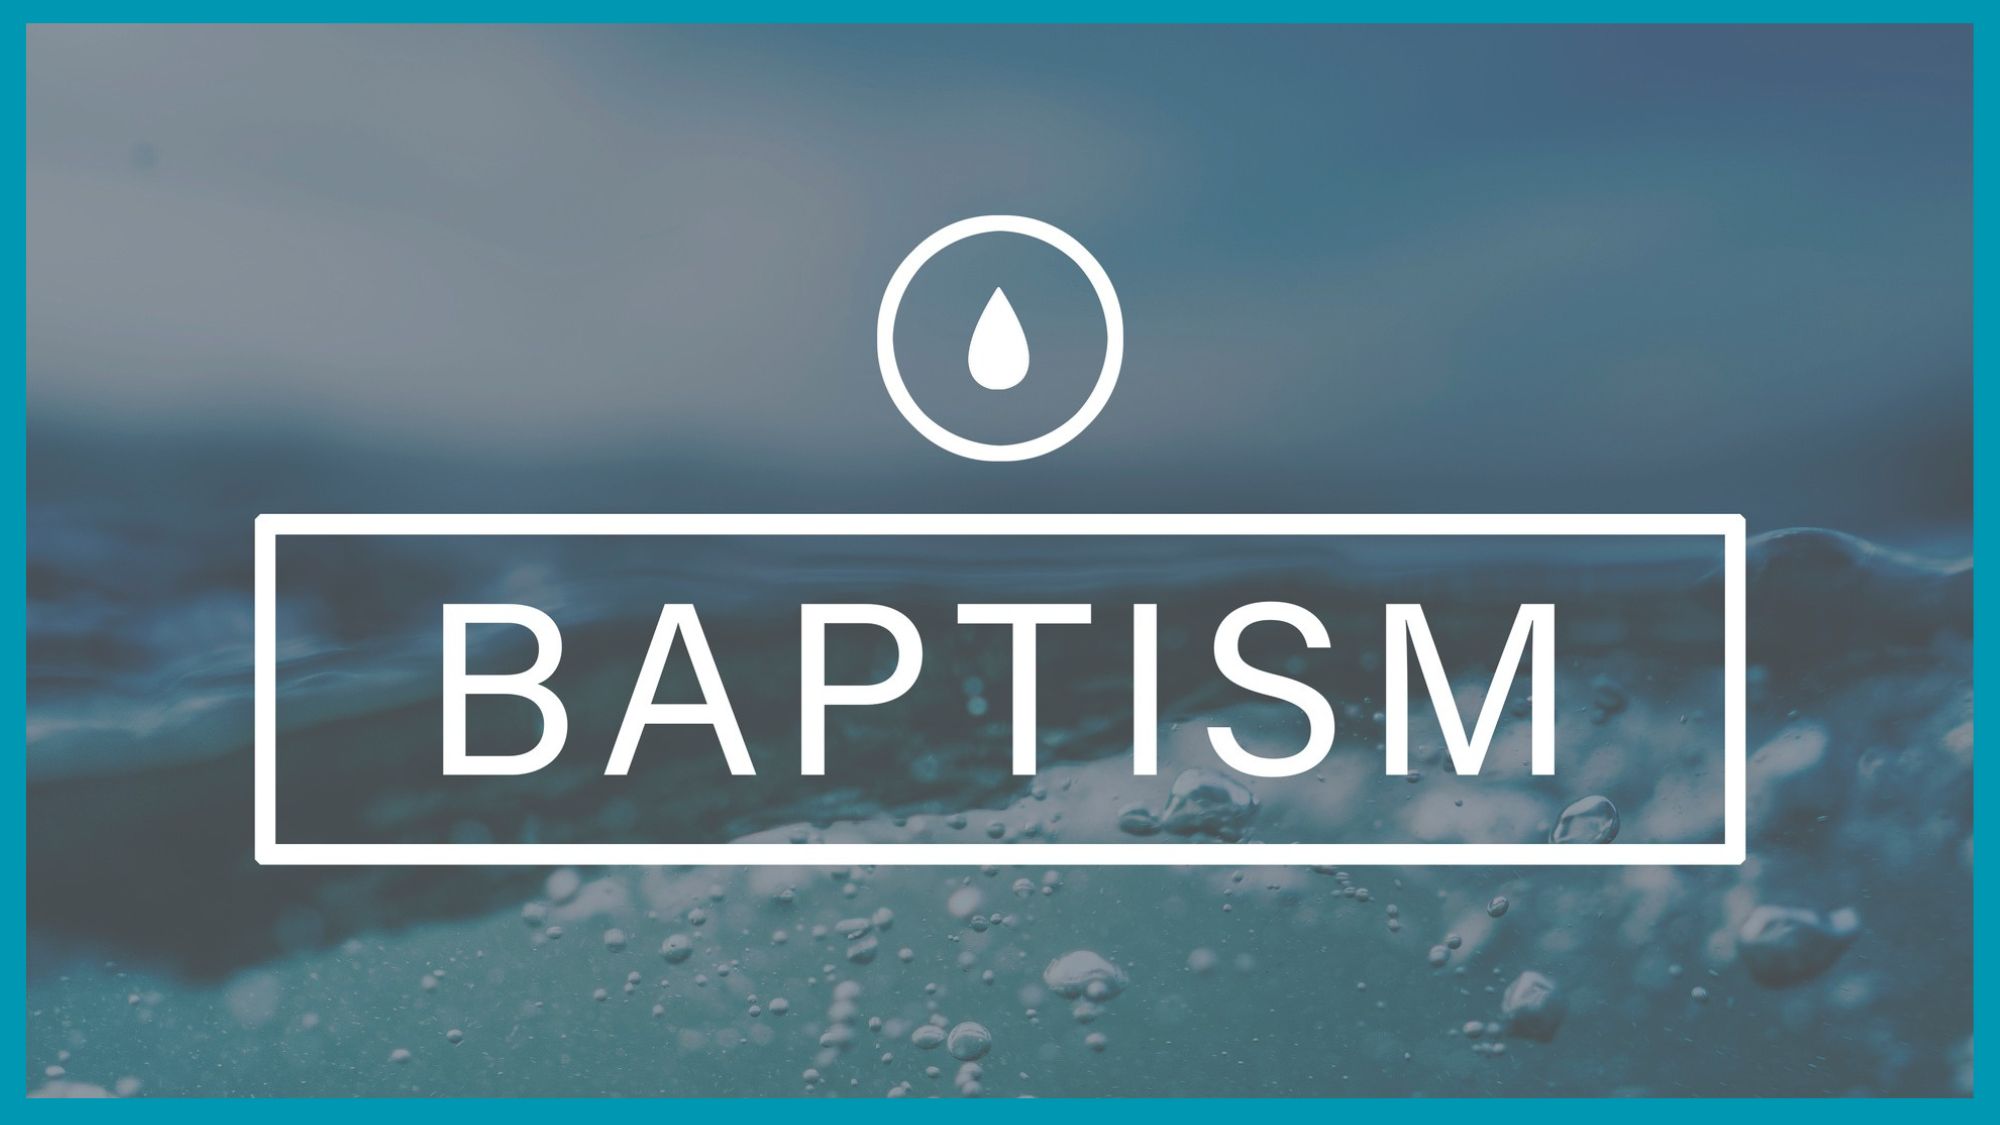 "Baptism" How does one become a Christian?